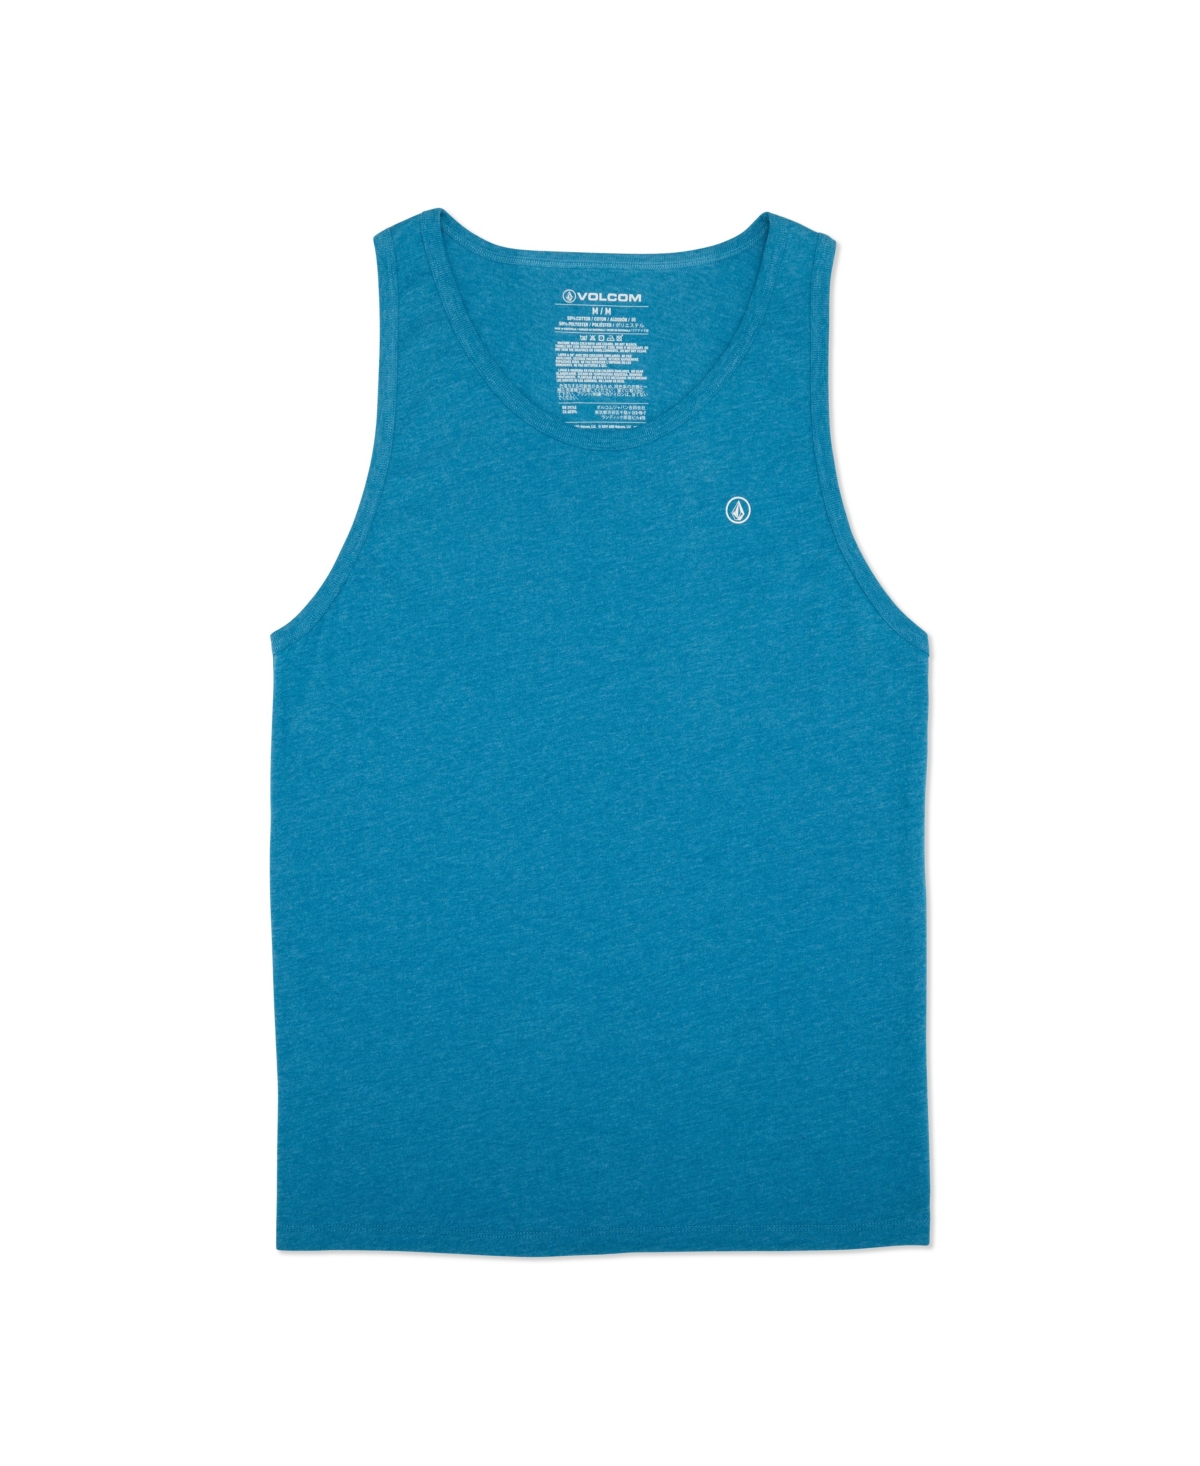 Men's Solid Heather Tank Top - Stormy Blue